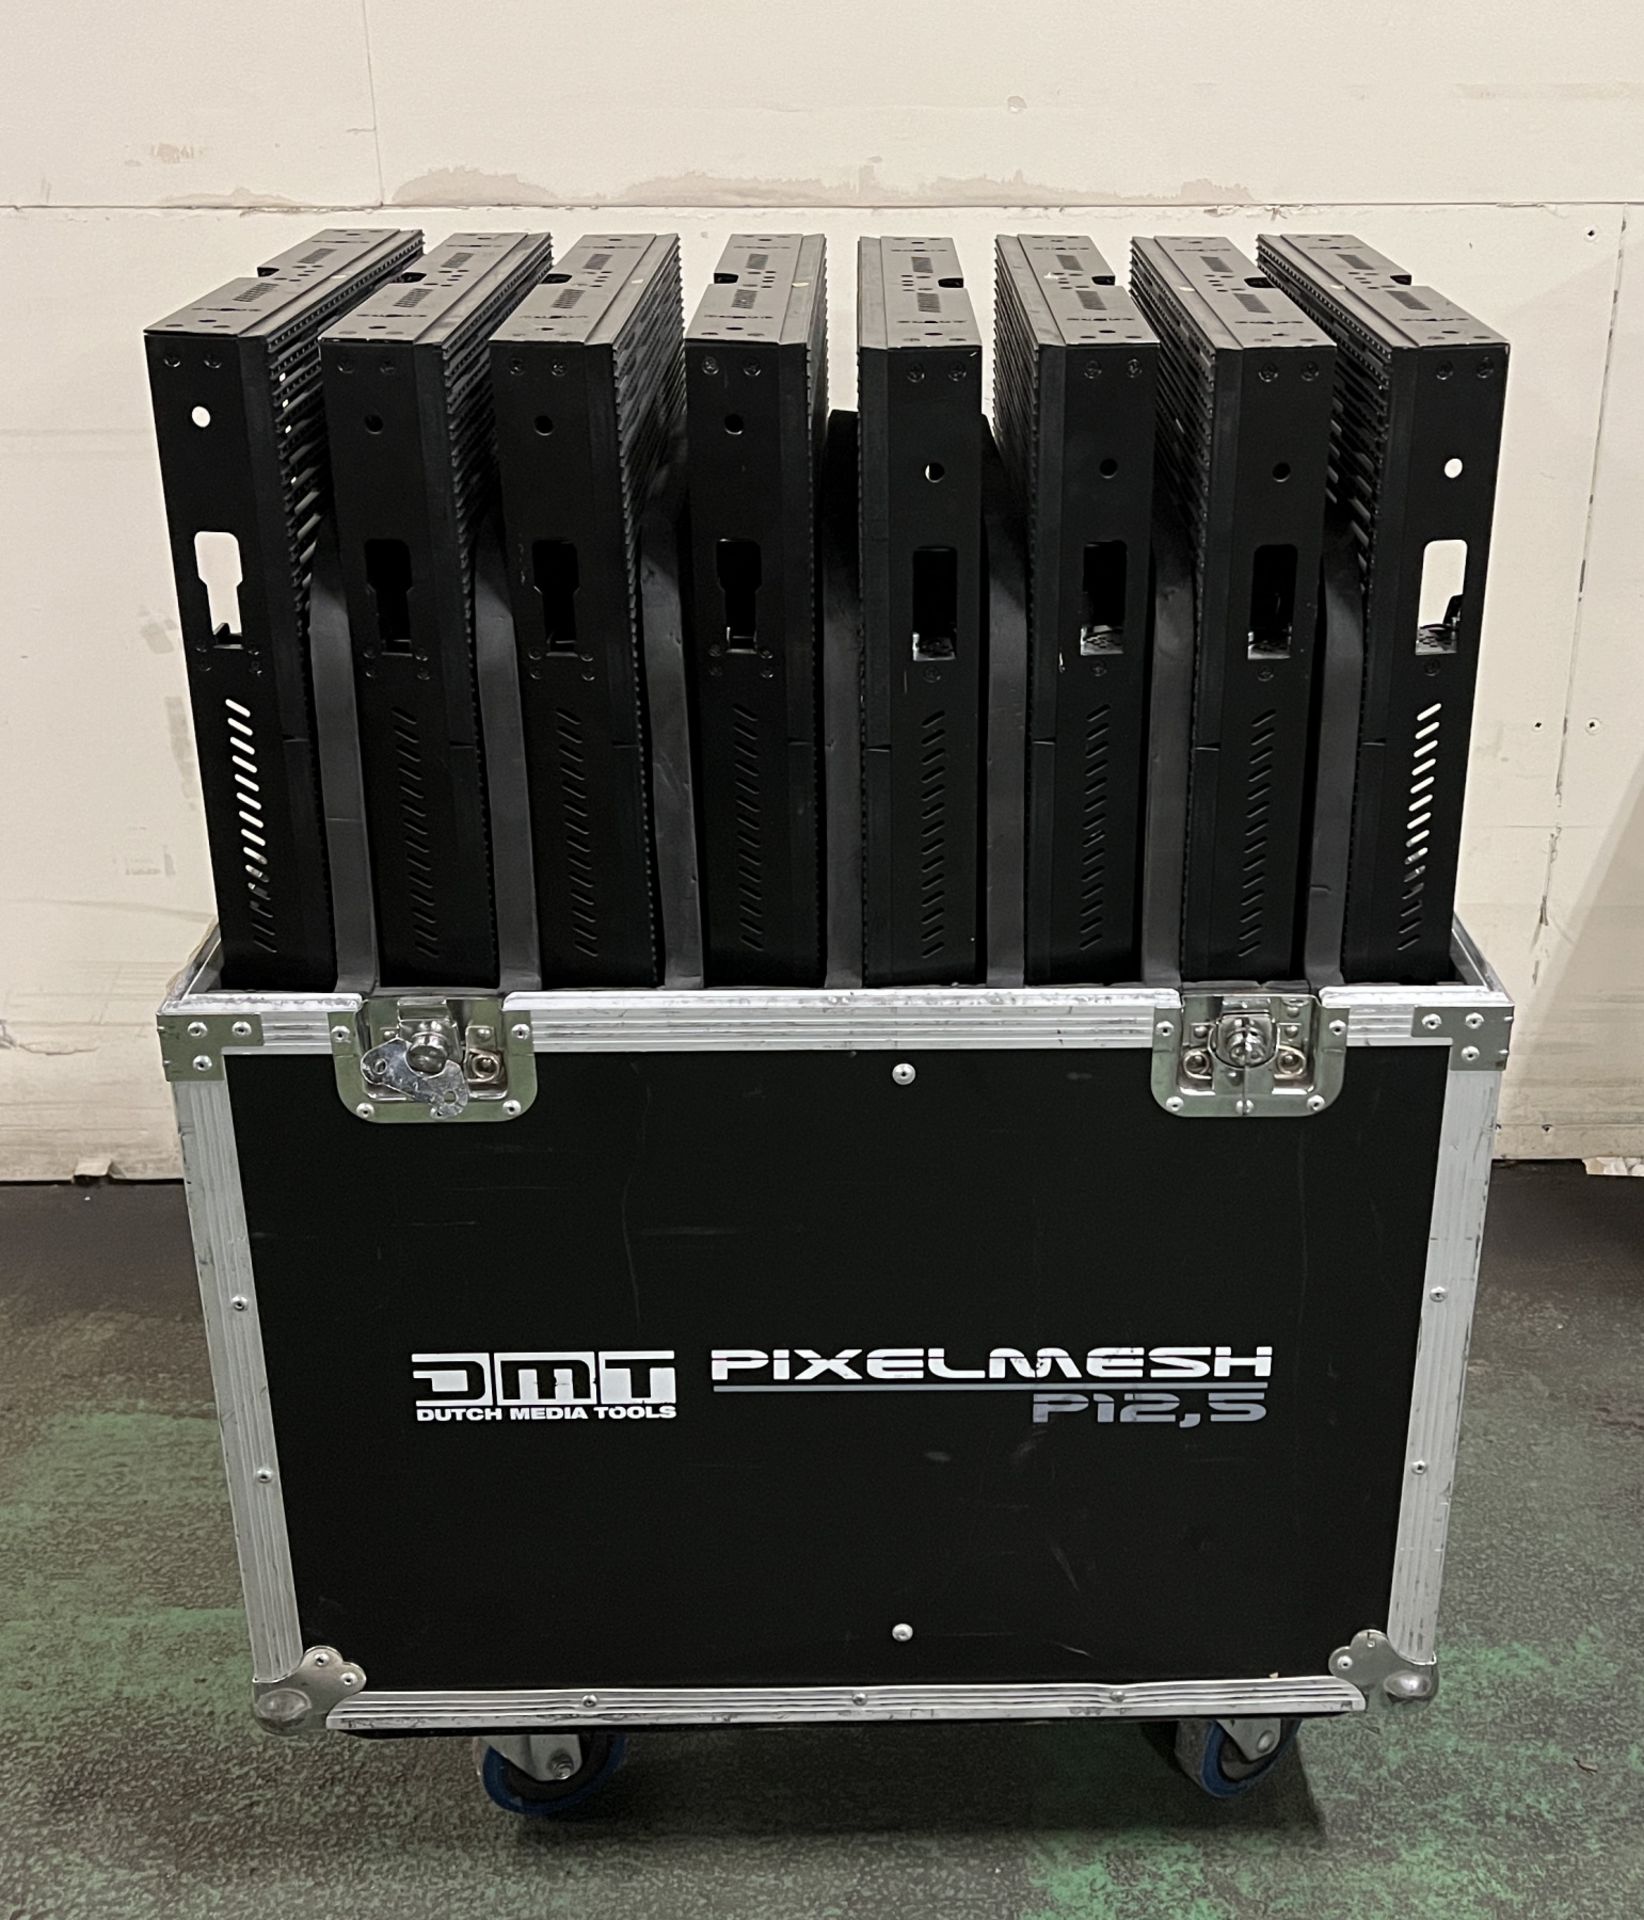 DMT Pixelmesh P12.5 LED video wall screens with flight cases - full details in description - Image 3 of 23